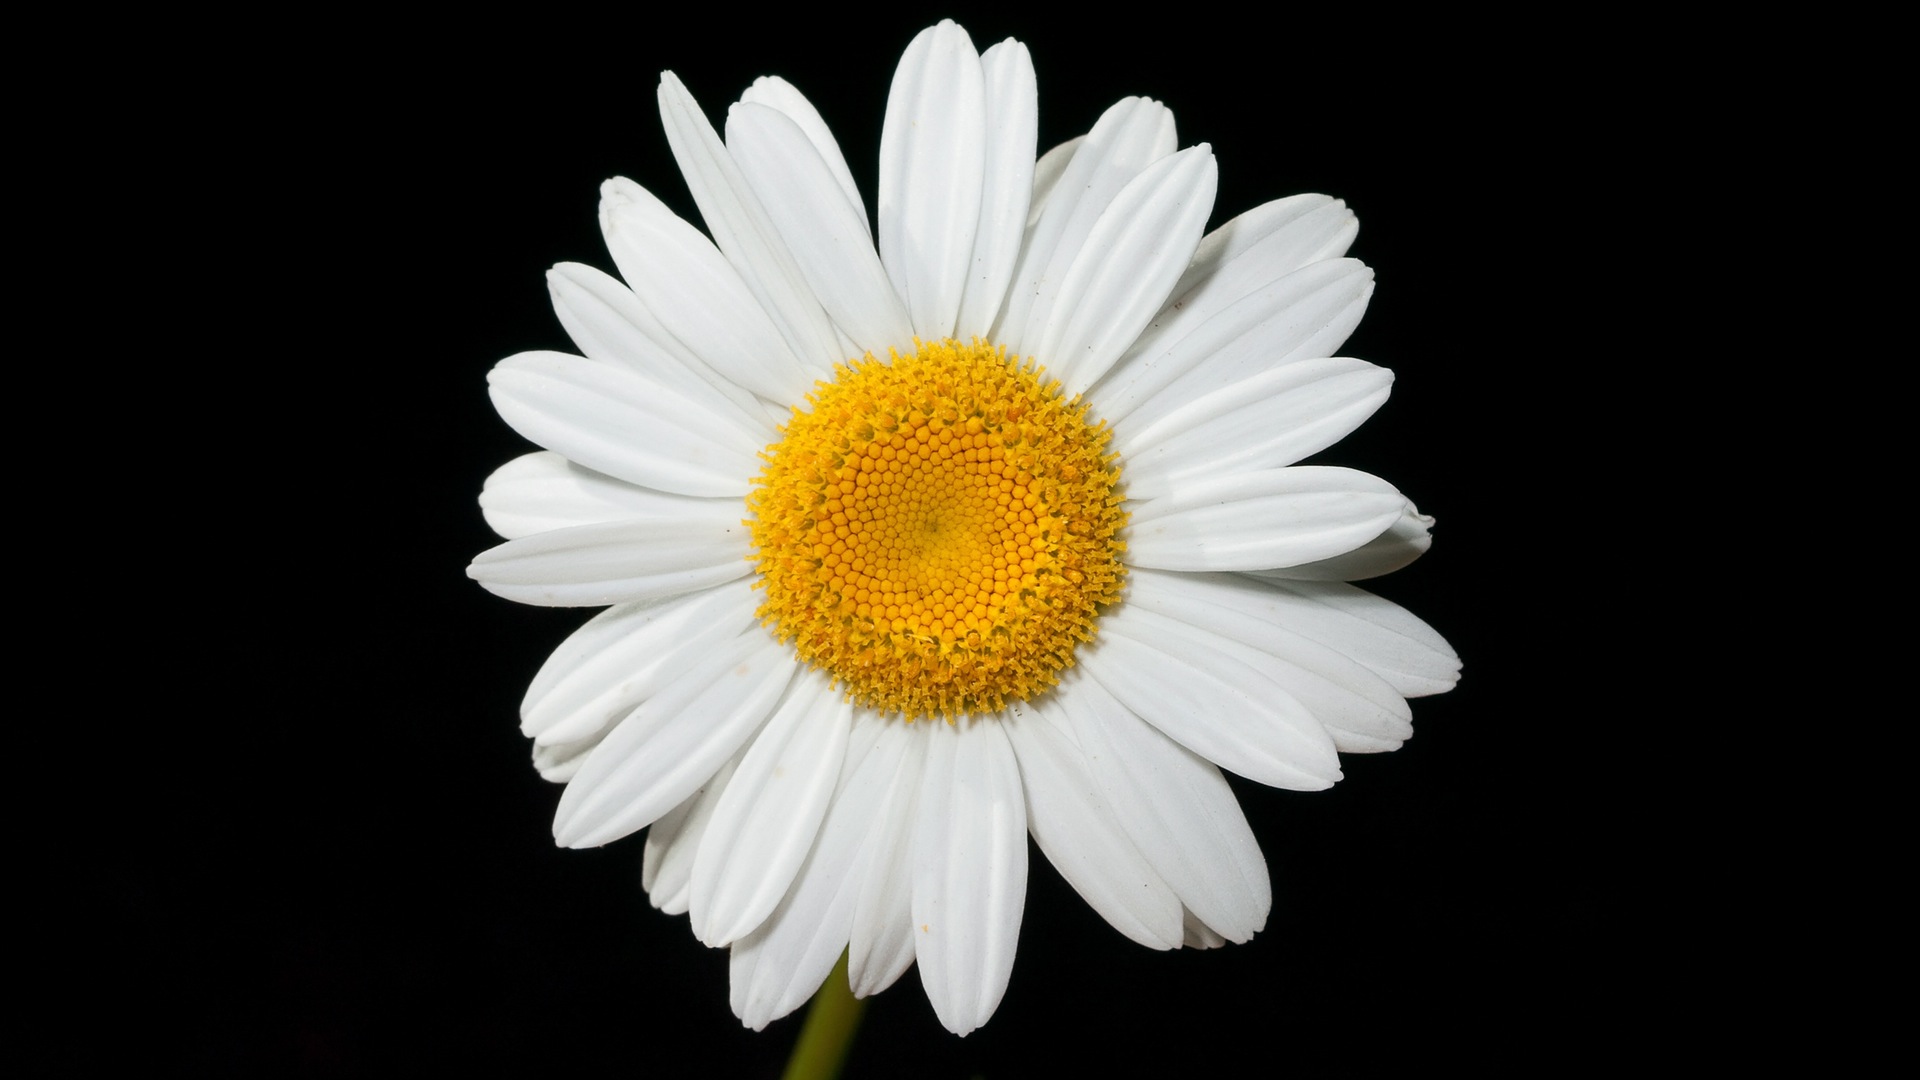 Flower Daisy Camomile Close Up White Flower 1920x1080